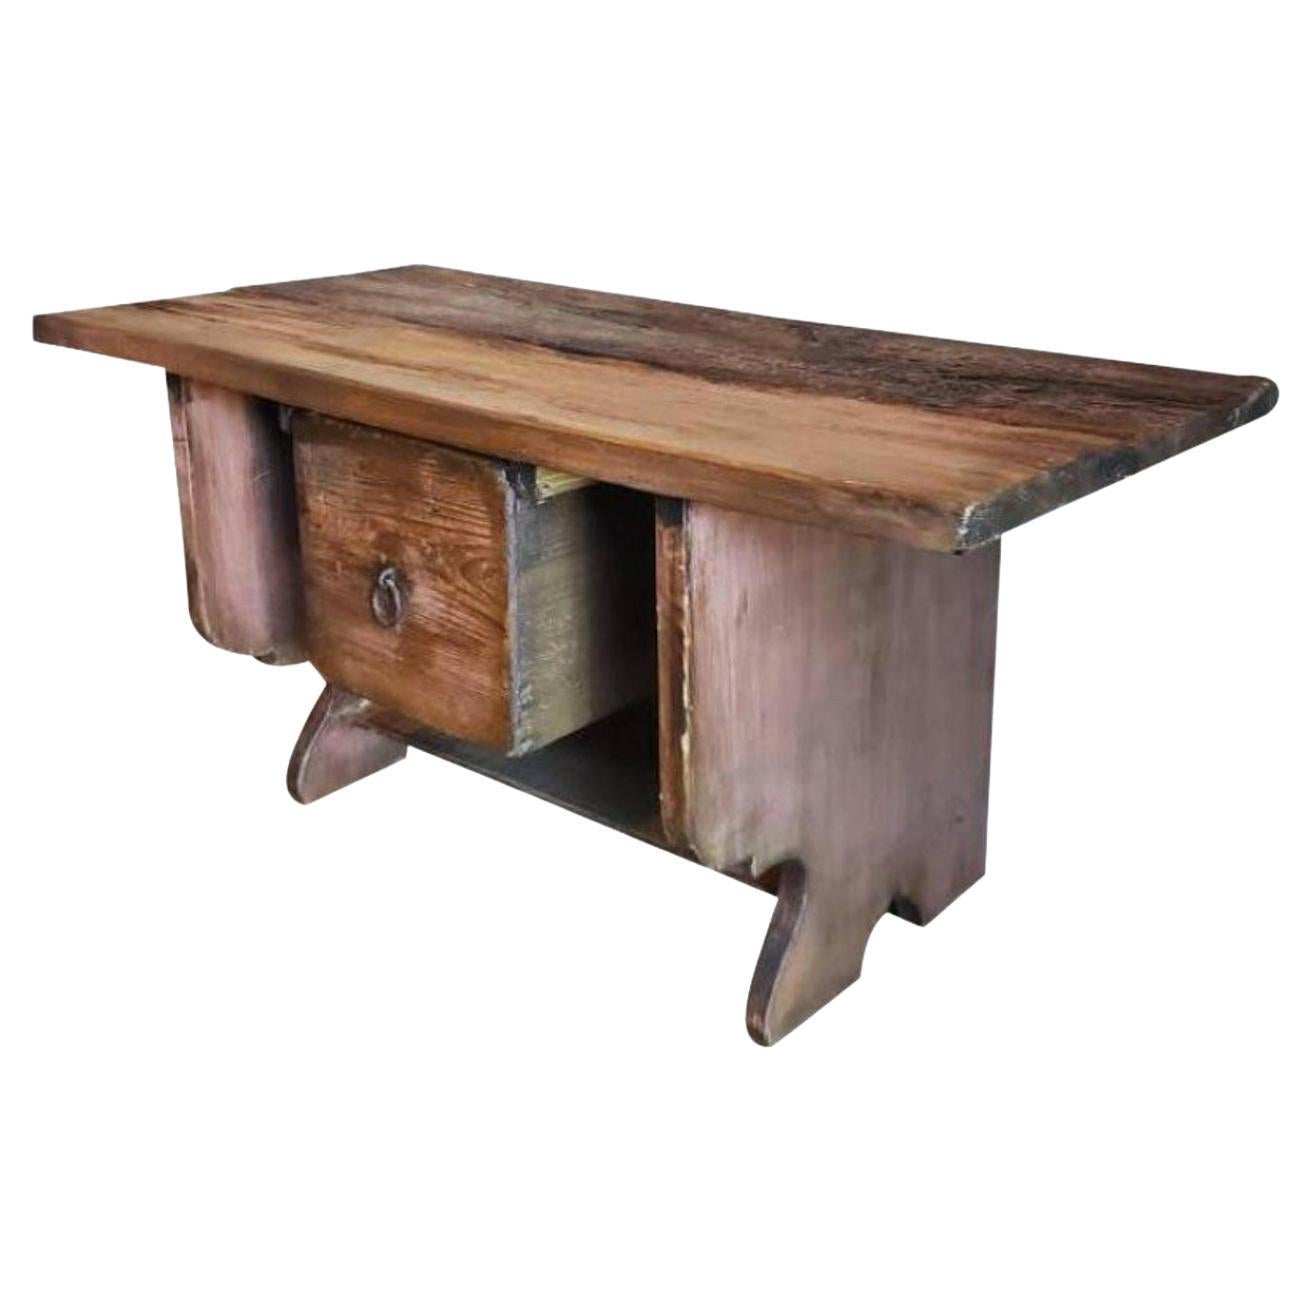 What is a live edge bench?